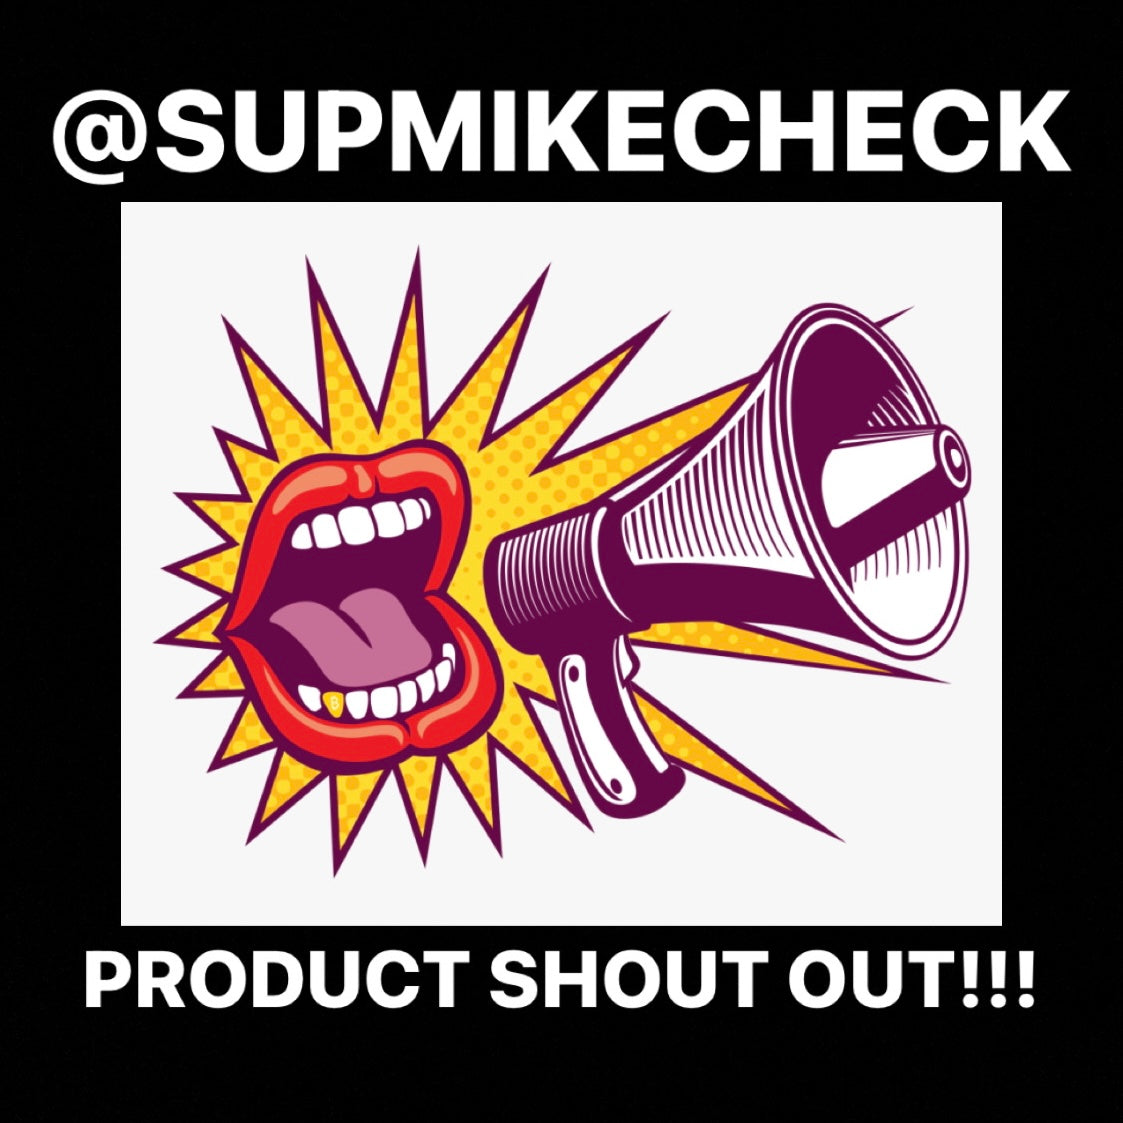 PRODUCT SHOUT OUT